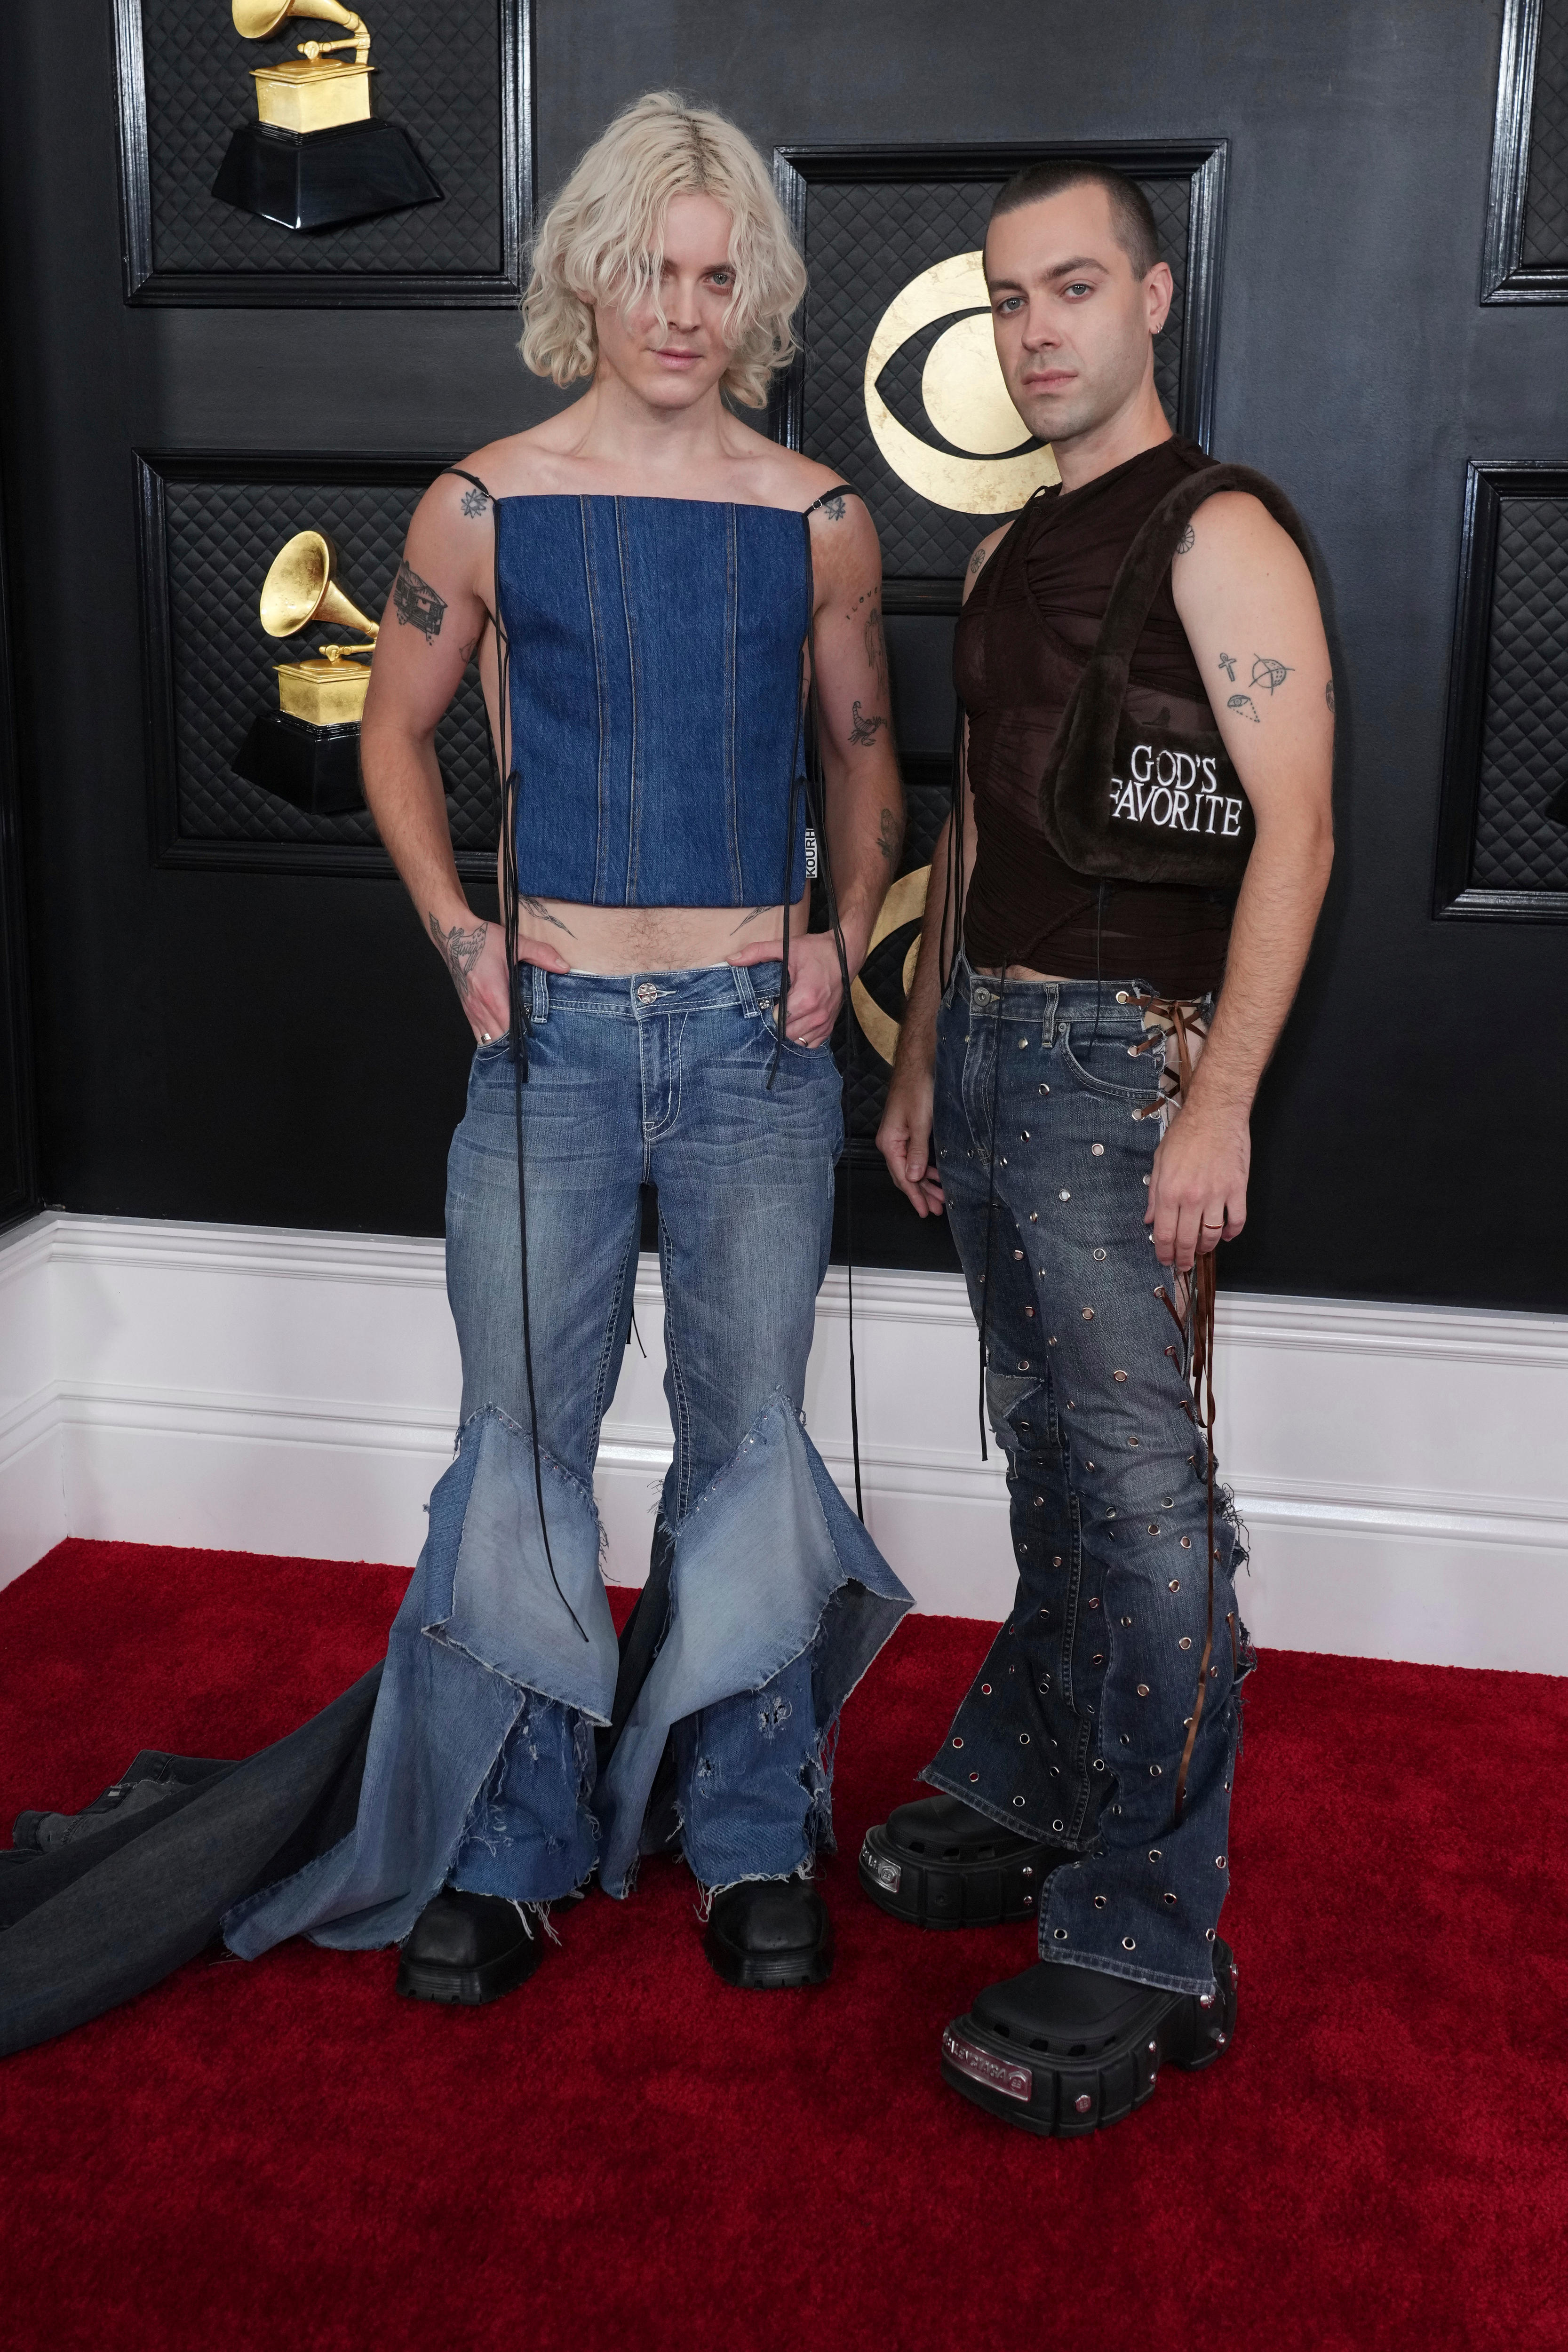 Grammys red carpet: A dress that looks like a garbage bag, double